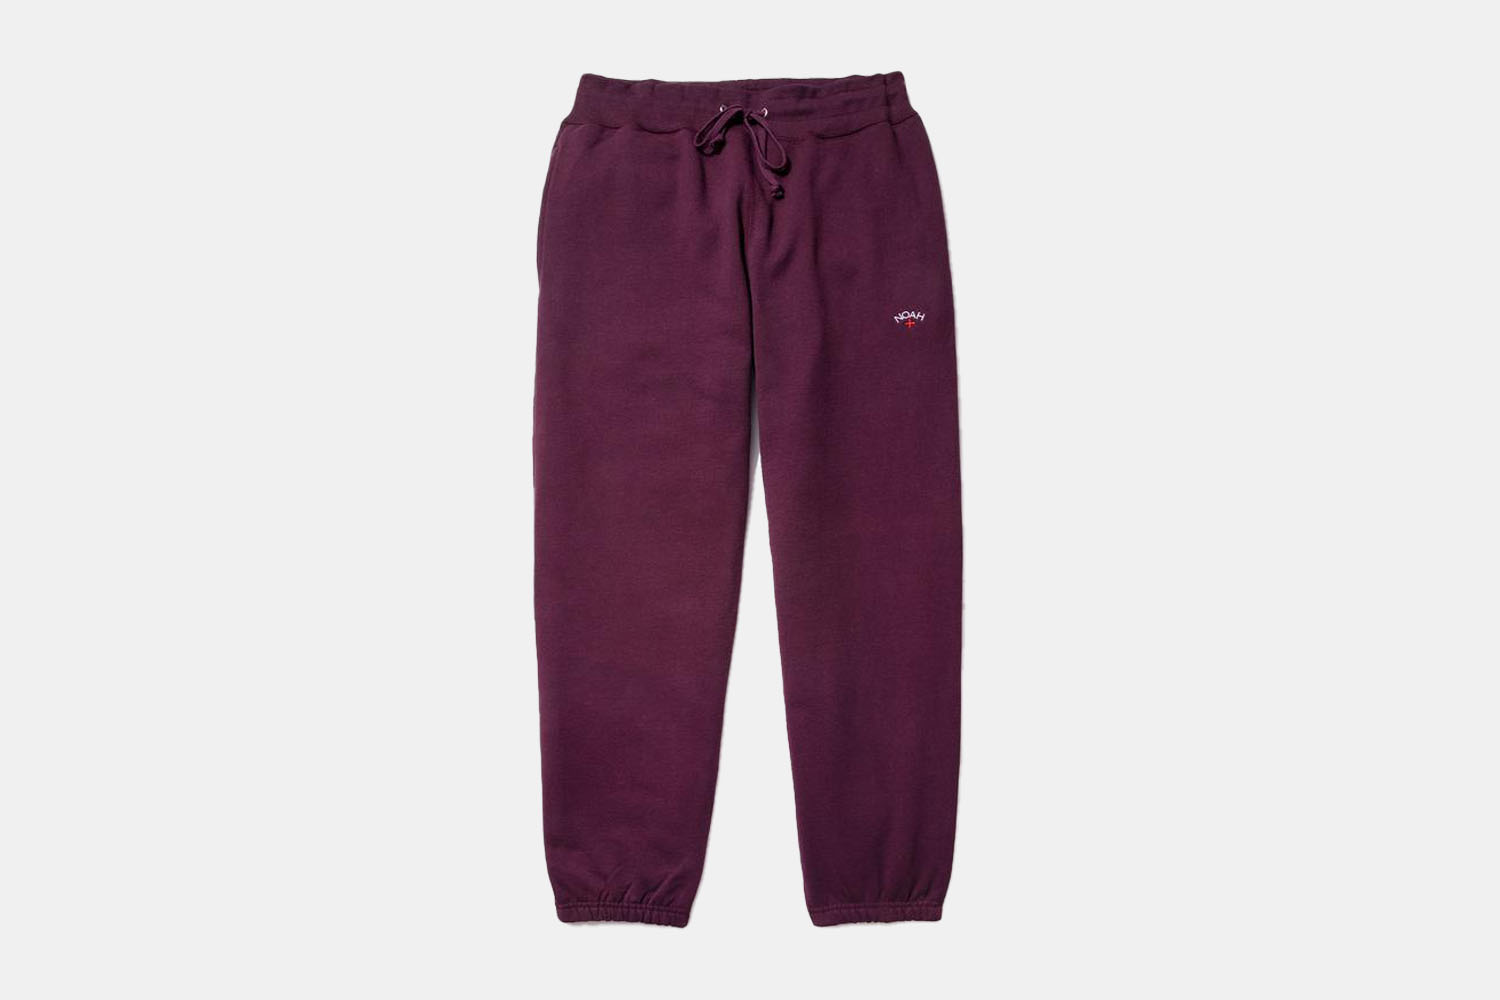 a pair of plum colored sweatpants 